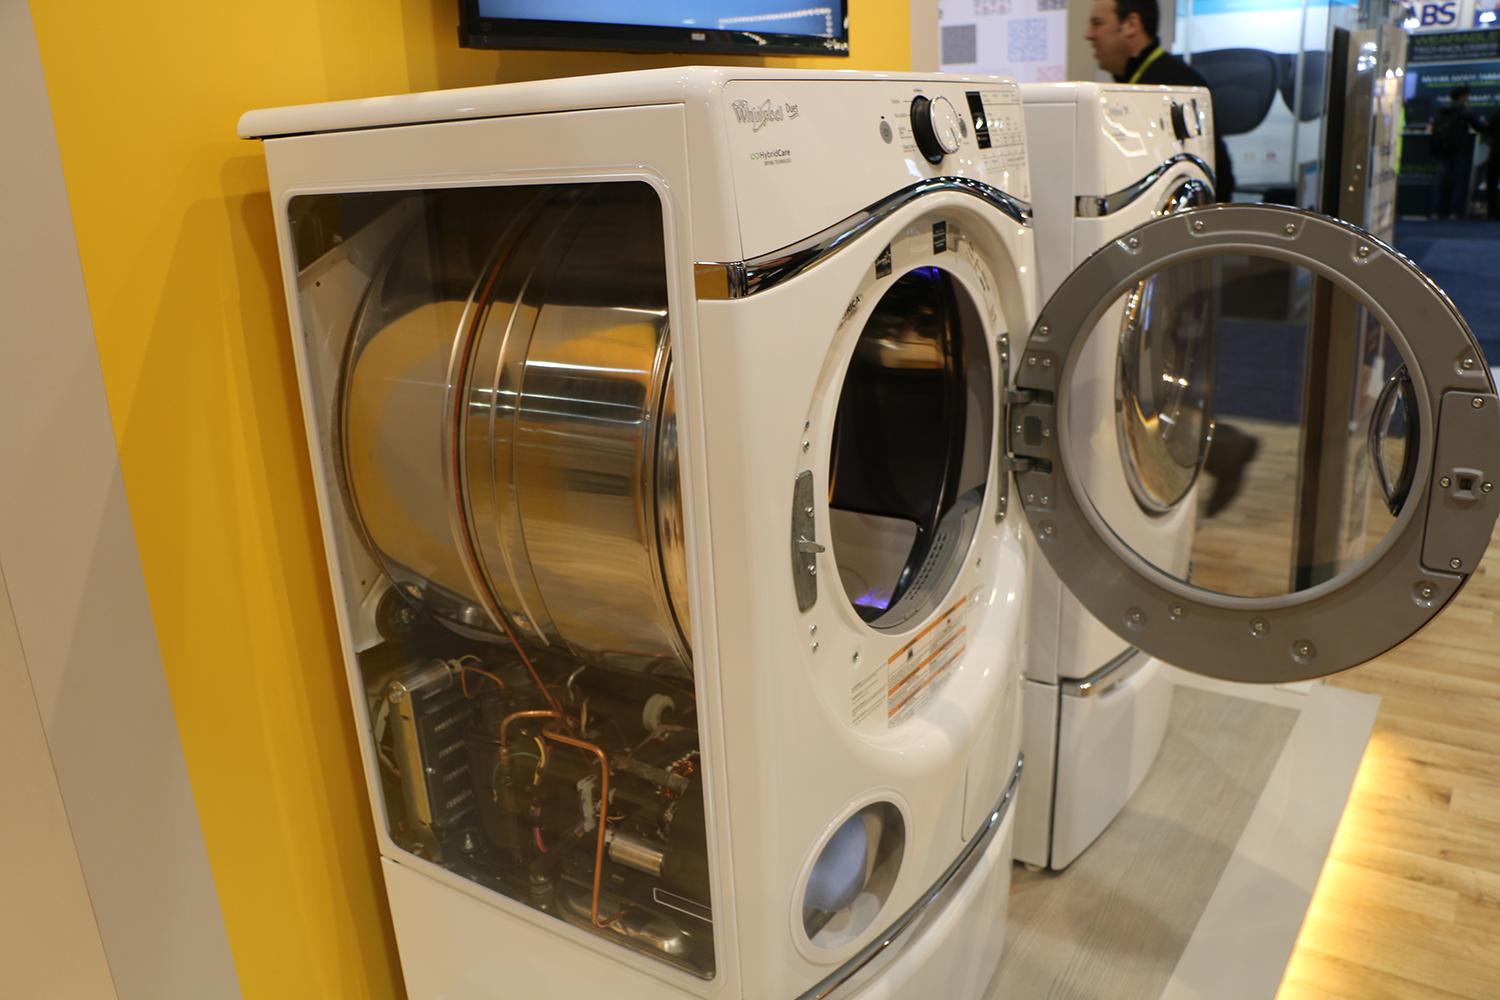 Whirlpool's new clothes dryer recycles its hot air instead of venting it, which the company says cuts its energy use by nearly 75%.